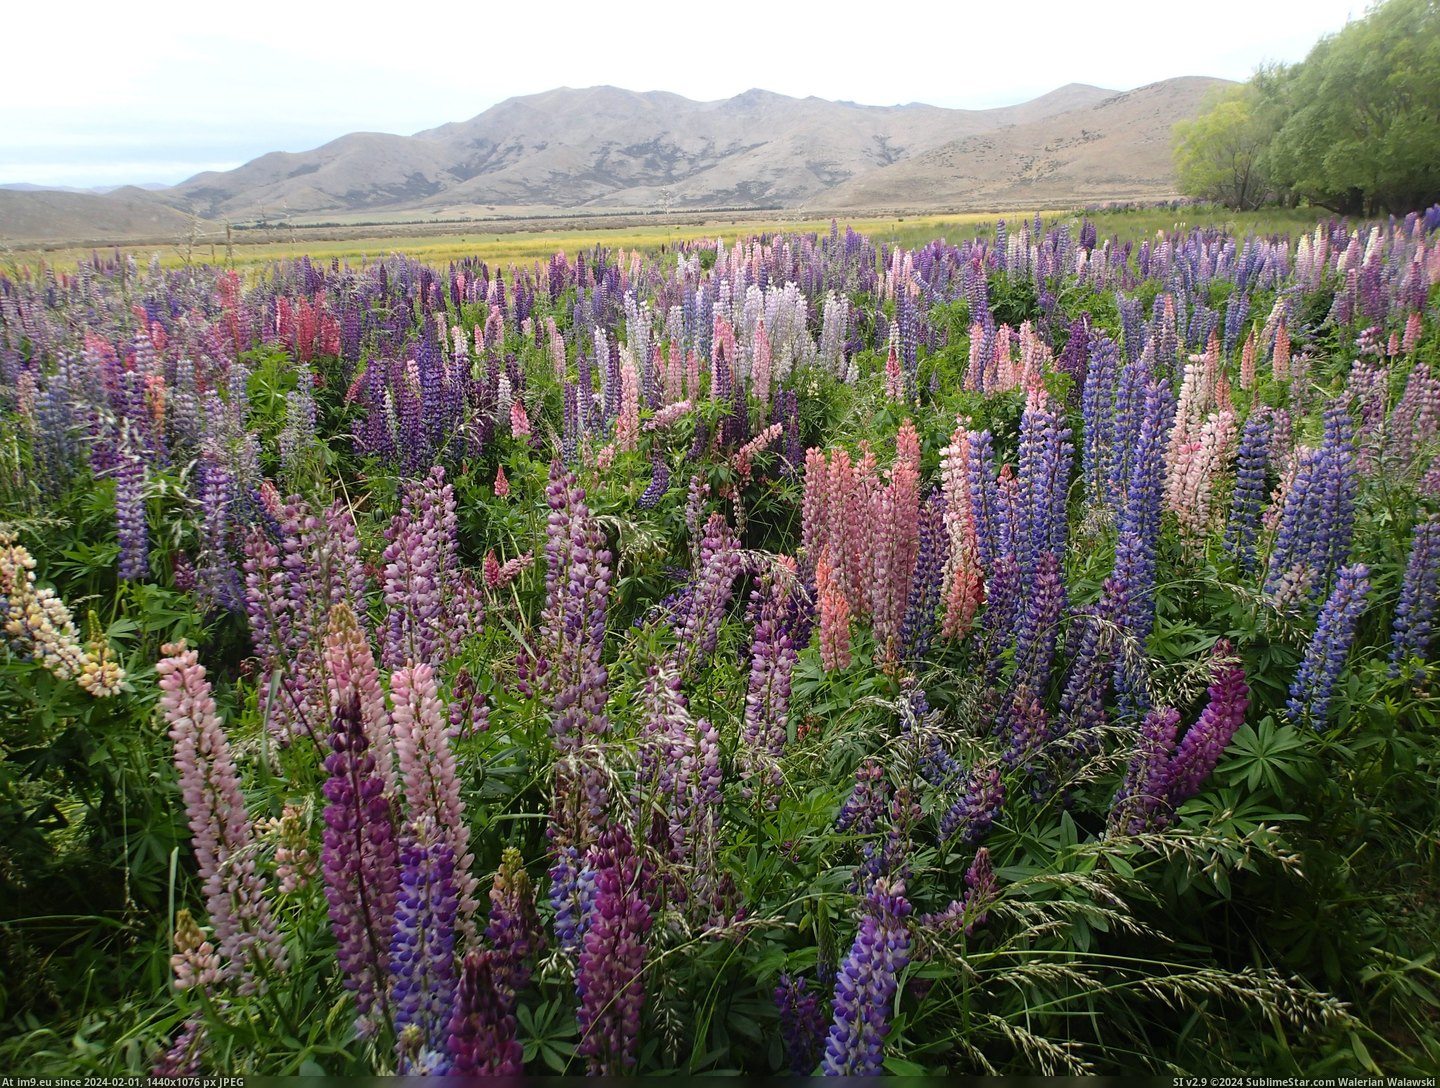 #Zealand #Central #Otago #3968x2976 #Blooming #Lupine [Earthporn] Lupine blooming in Central Otago, New Zealand  [3968x2976] Pic. (Image of album My r/EARTHPORN favs))